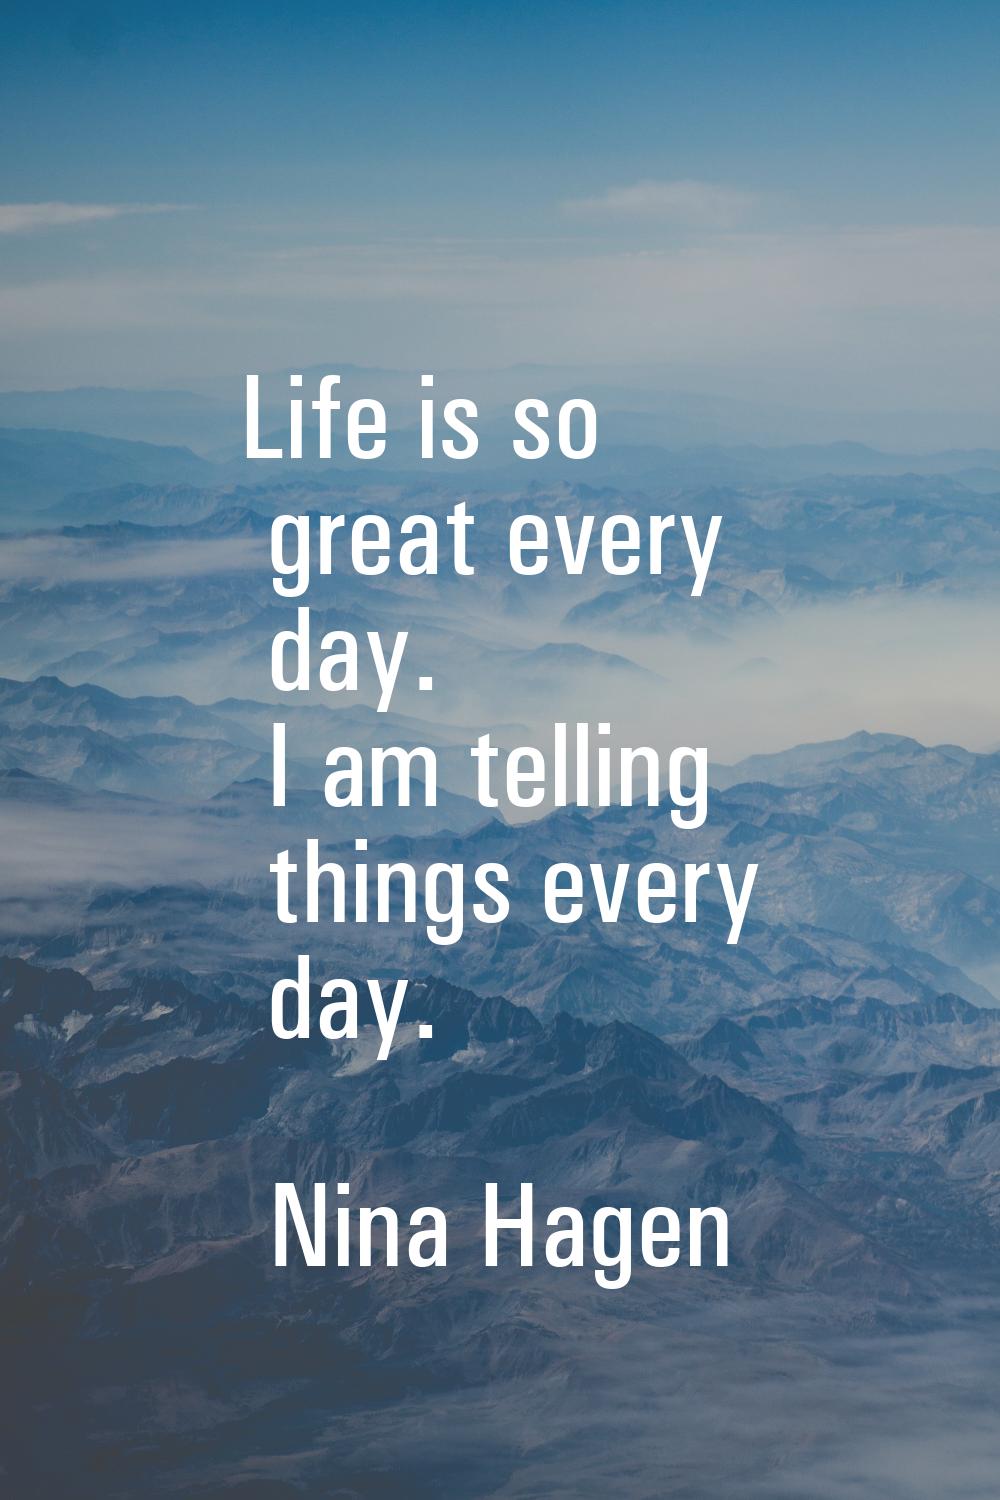 Life is so great every day. I am telling things every day.